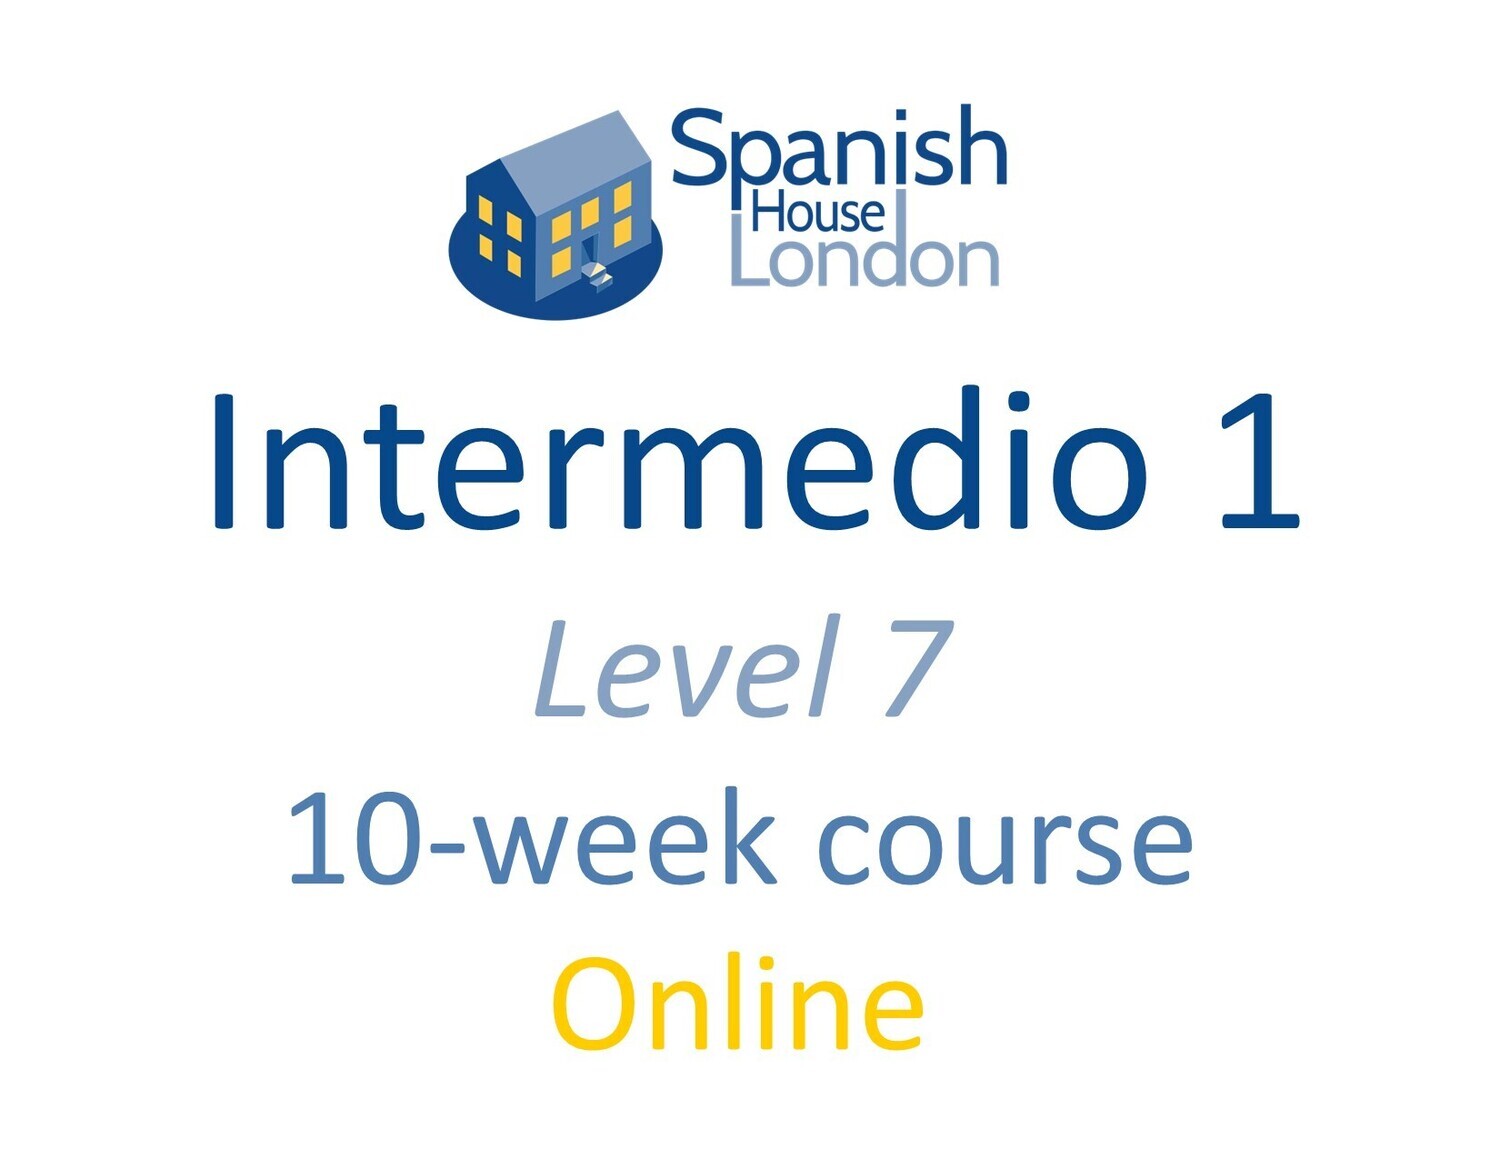 Intermedio 1 Course starting on 26th June at 6pm Online